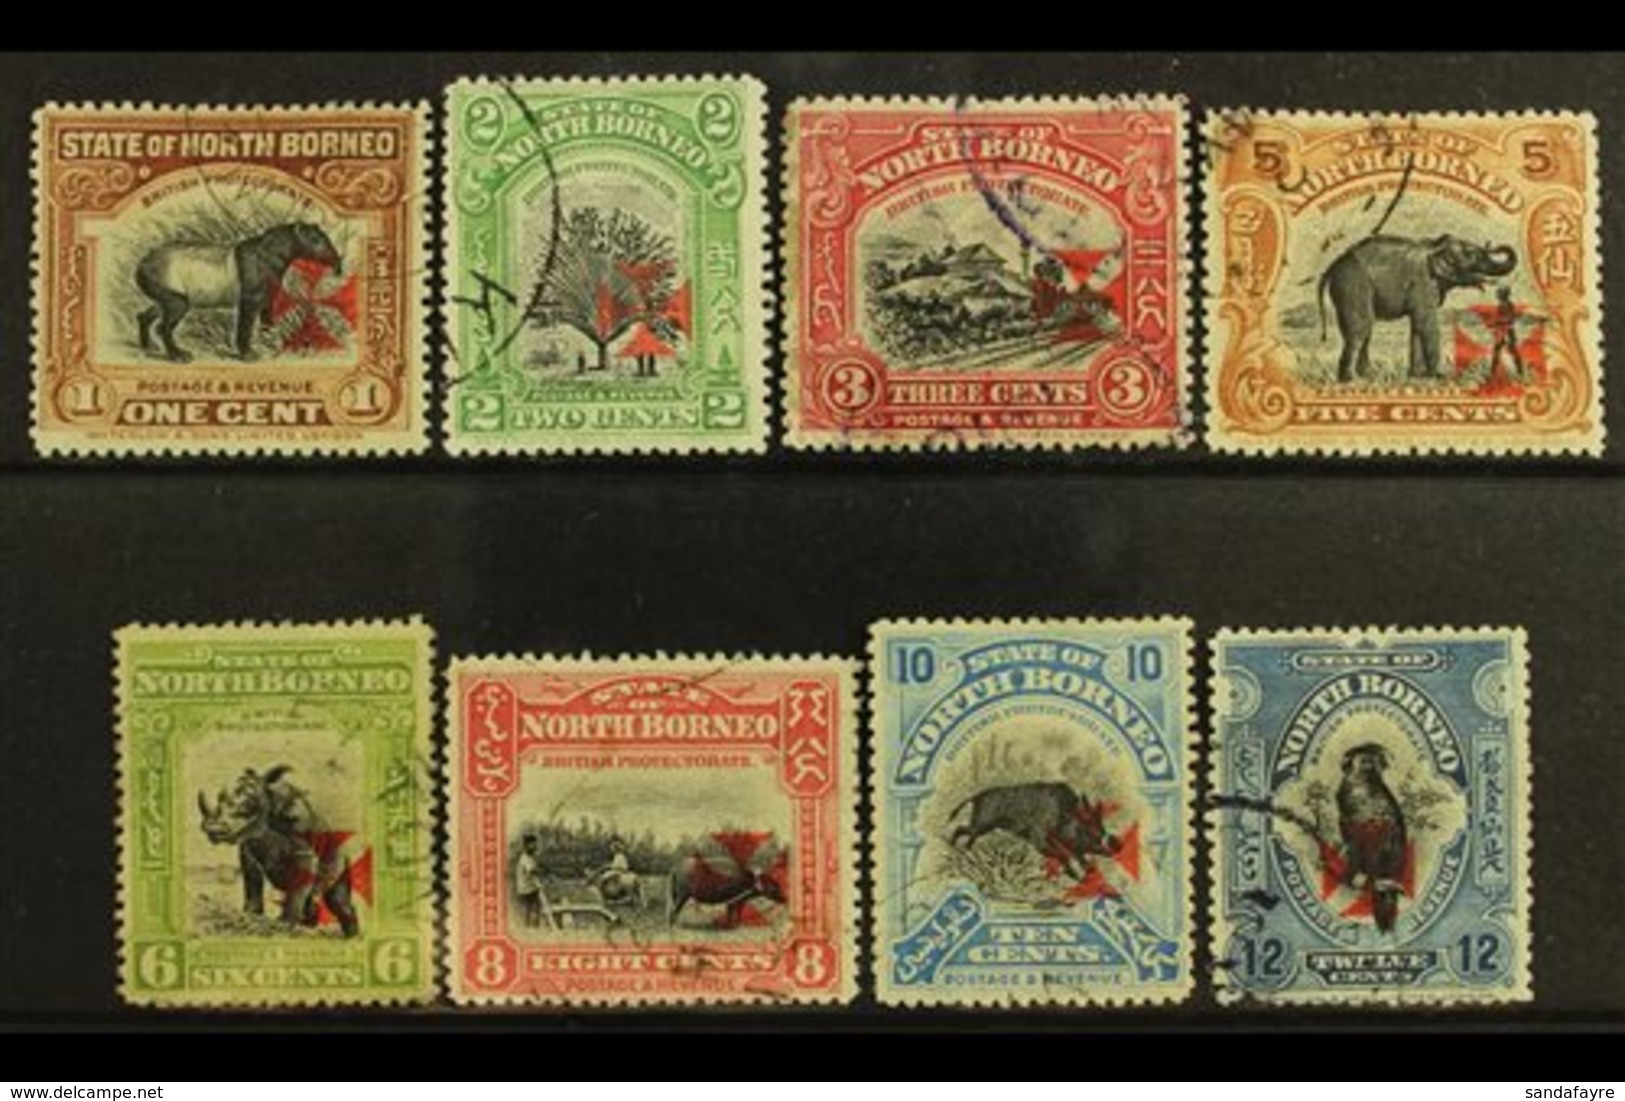 1916  Red Cross Overprints In Carmine Set To 12c (no 4c Carmine), SG 202/209 (no 204a), Very Fine Used. (8 Stamps) For M - Borneo Septentrional (...-1963)